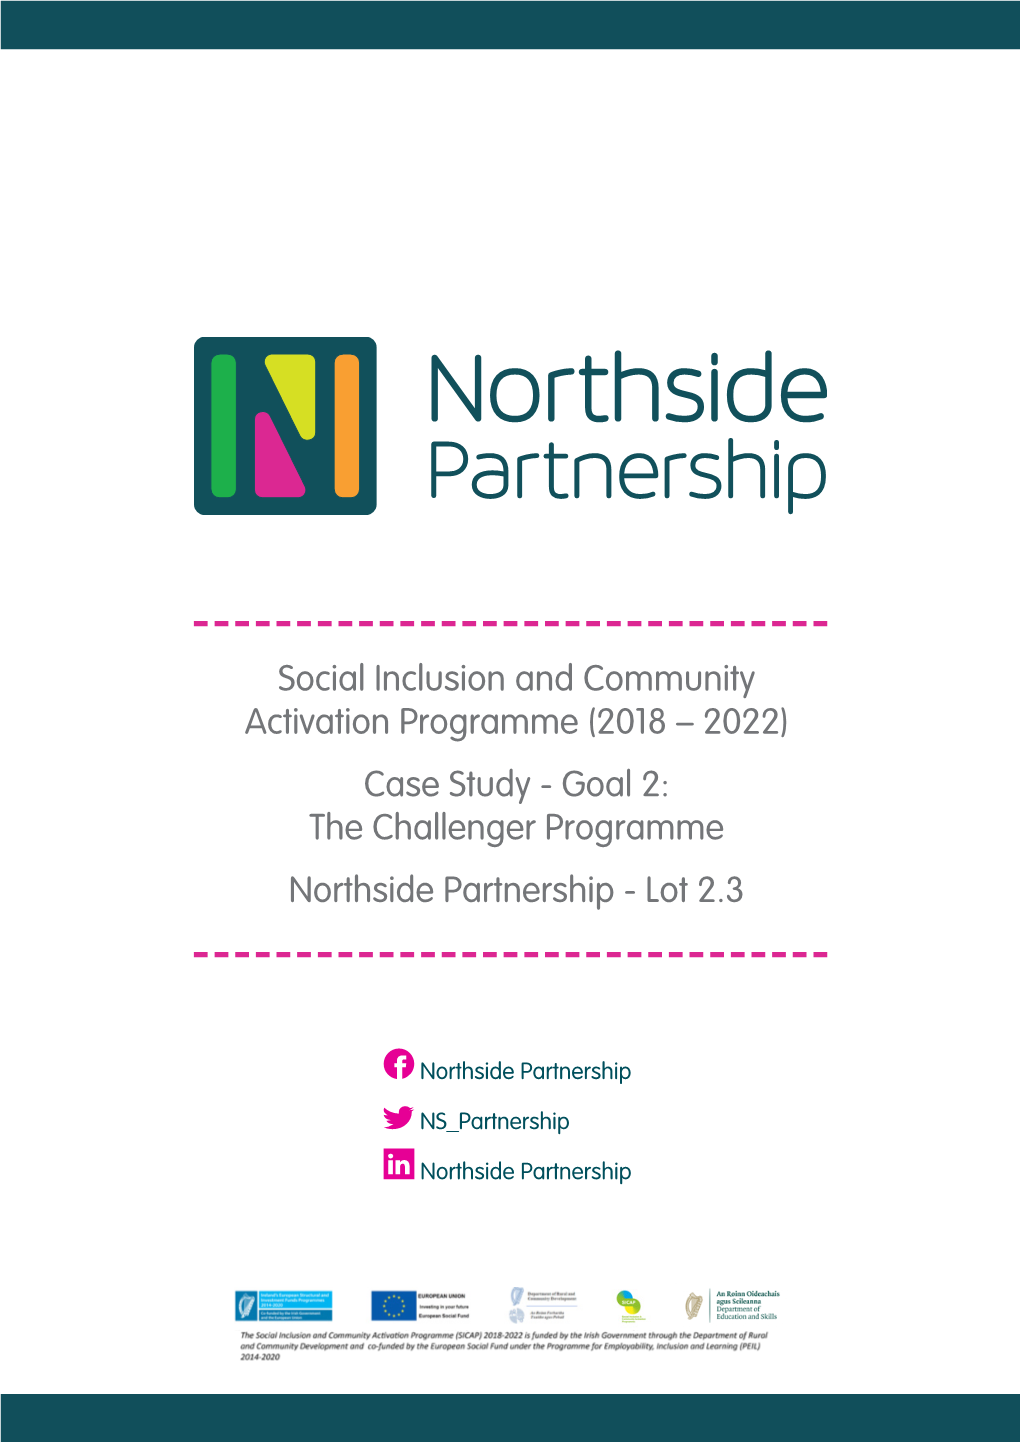 Social Inclusion and Community Activation Programme (2018 – 2022) Case Study - Goal 2: the Challenger Programme Northside Partnership - Lot 2.3